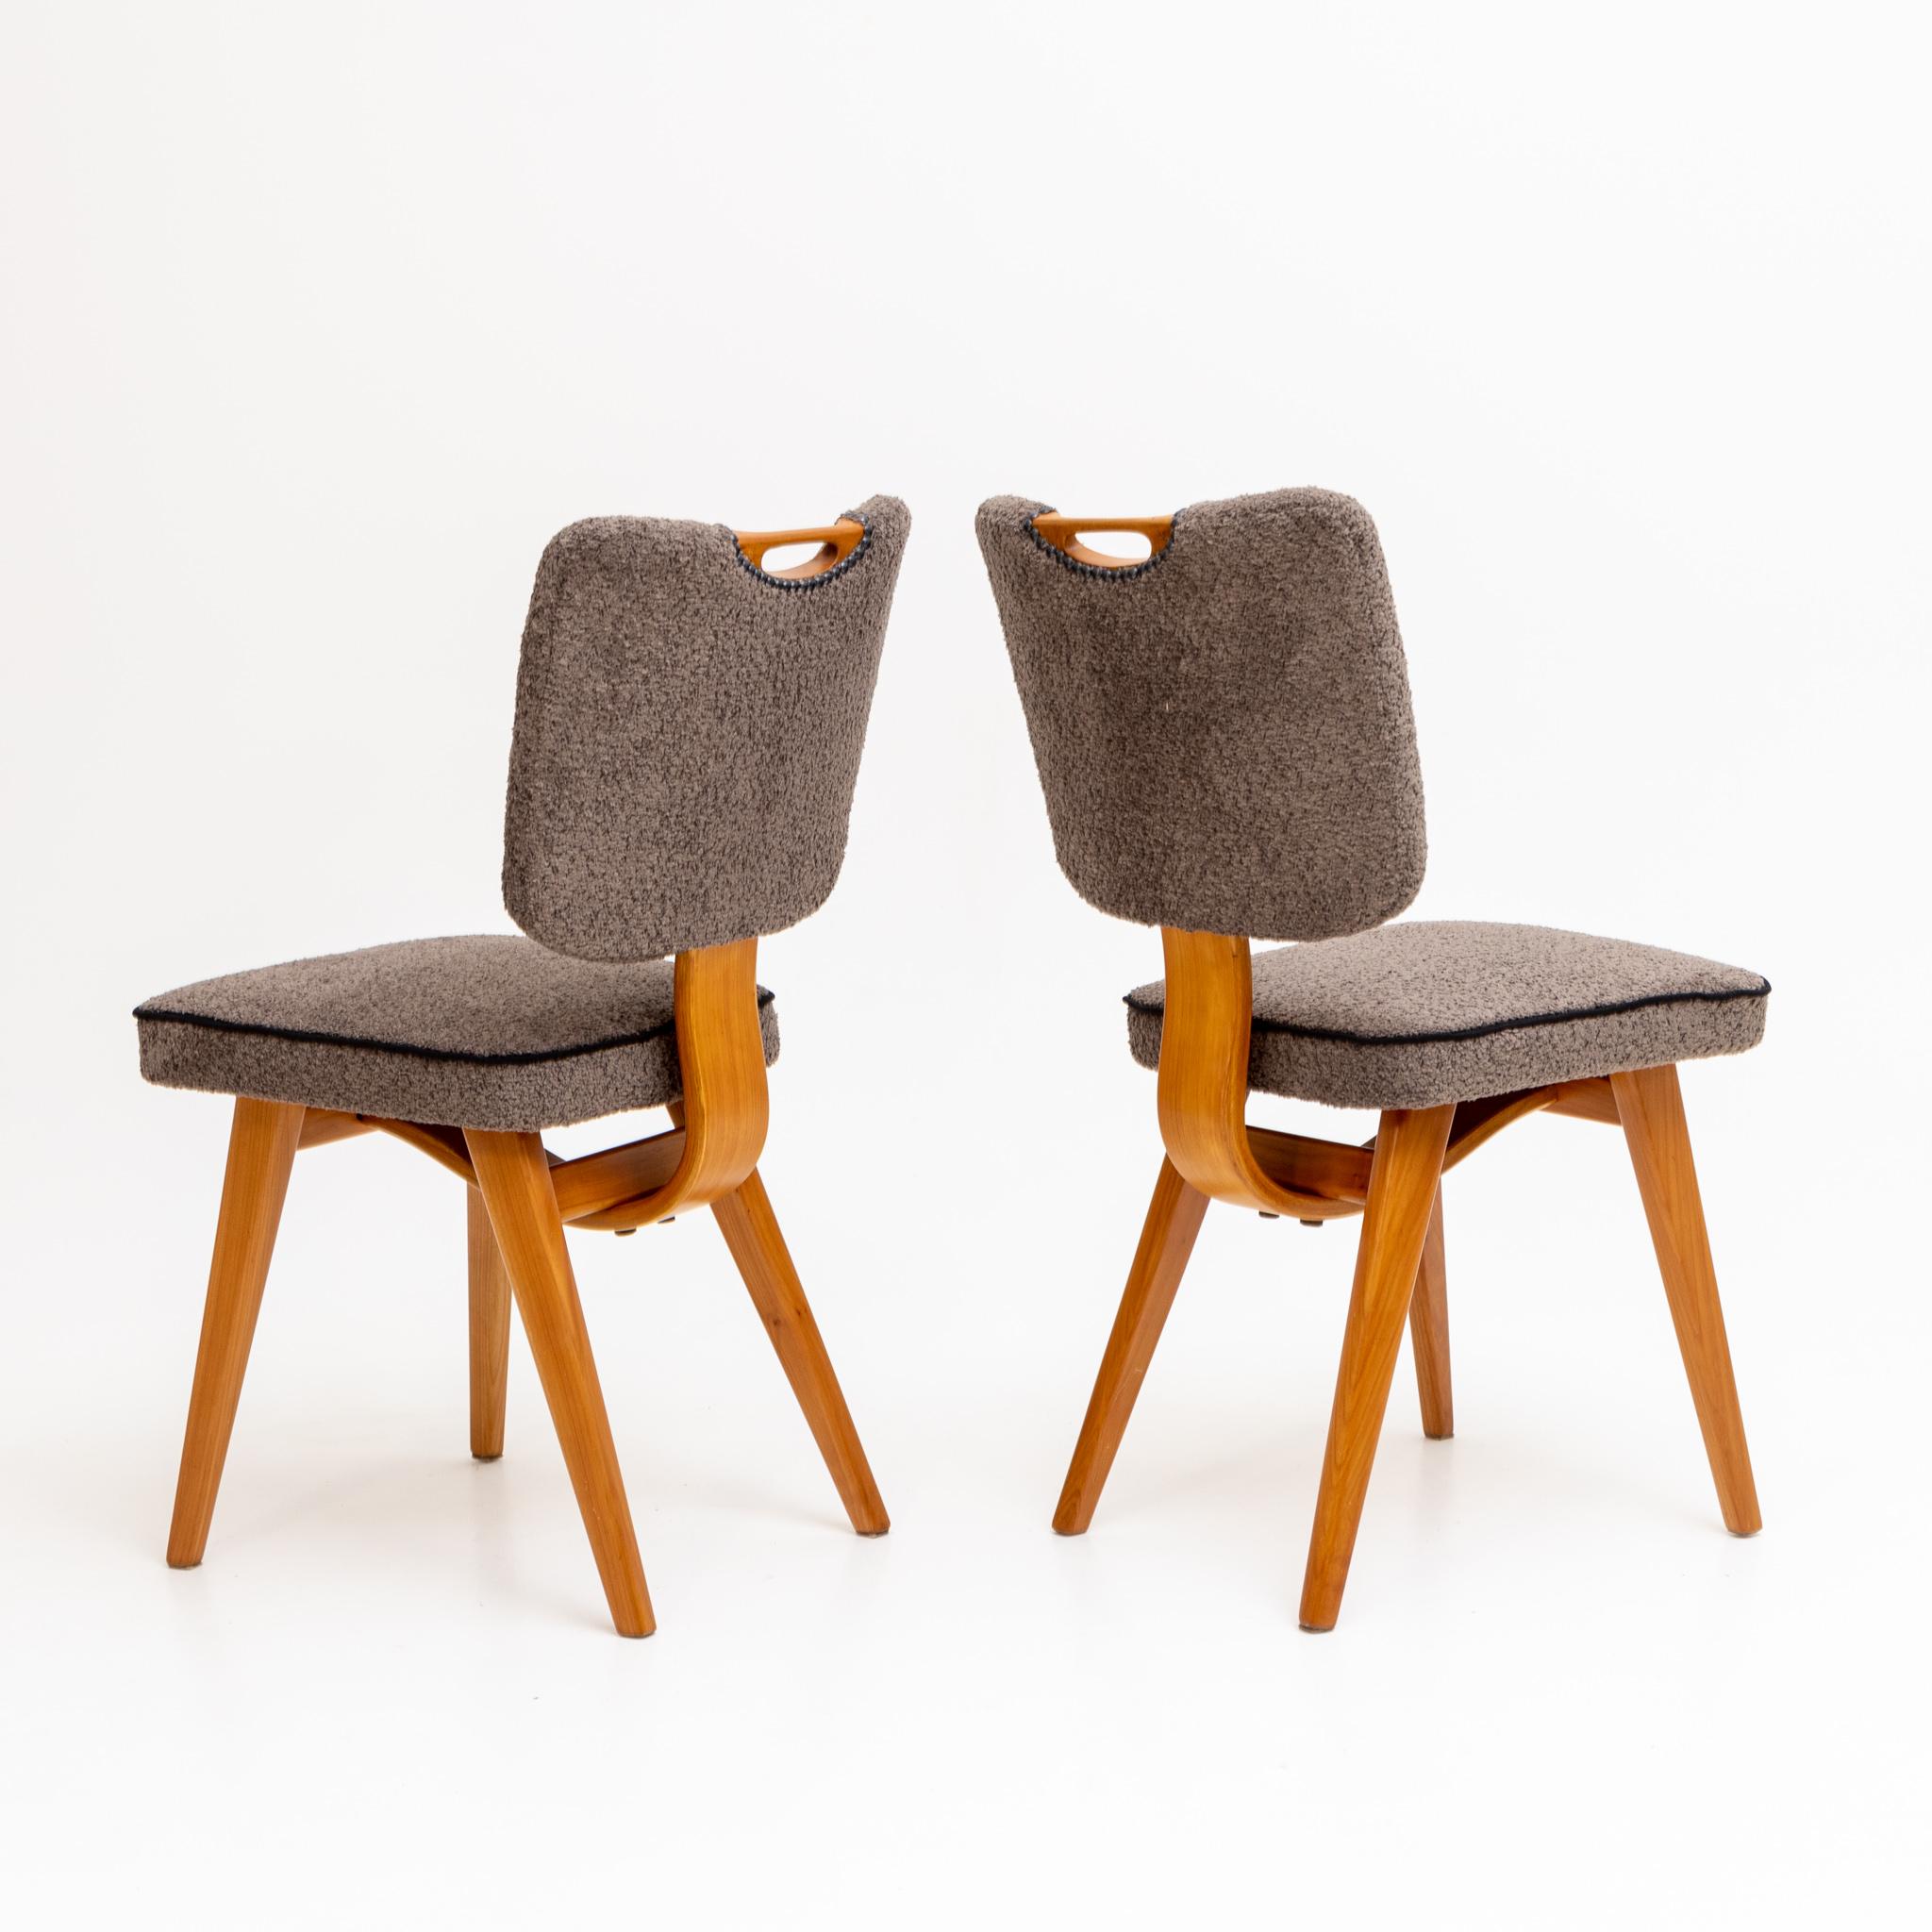 Four Chairs, Italian Manufactory, Mid-20th Century 4